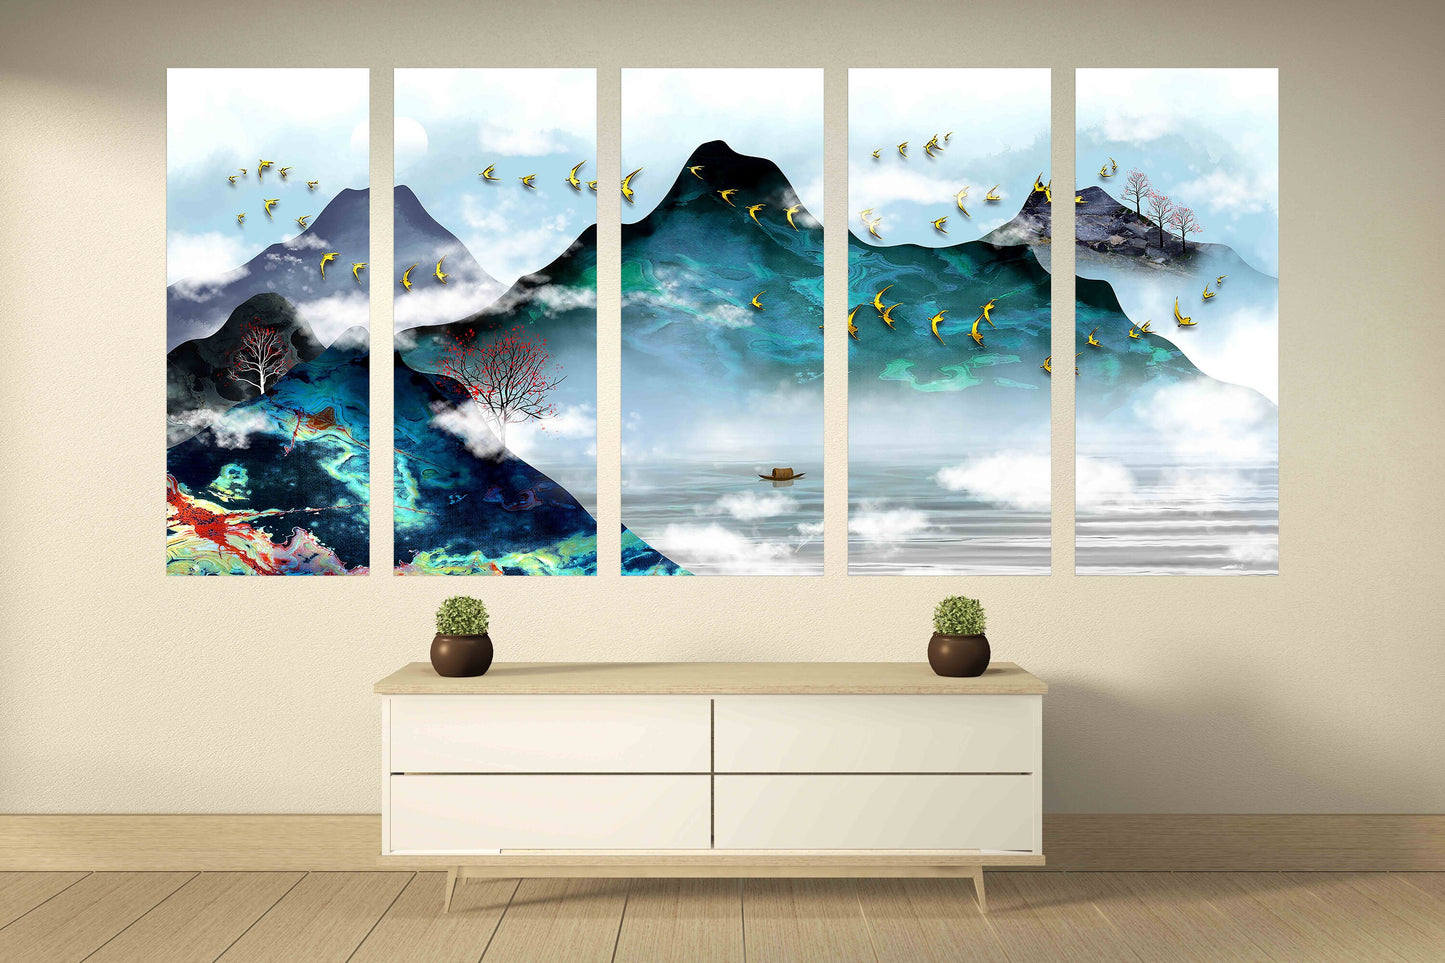 Smoky mountains wall art Blue ridge mountains wall art 3 panel canvas Outdoors mountains Rocks and mountains Canvas painting Home wall decor